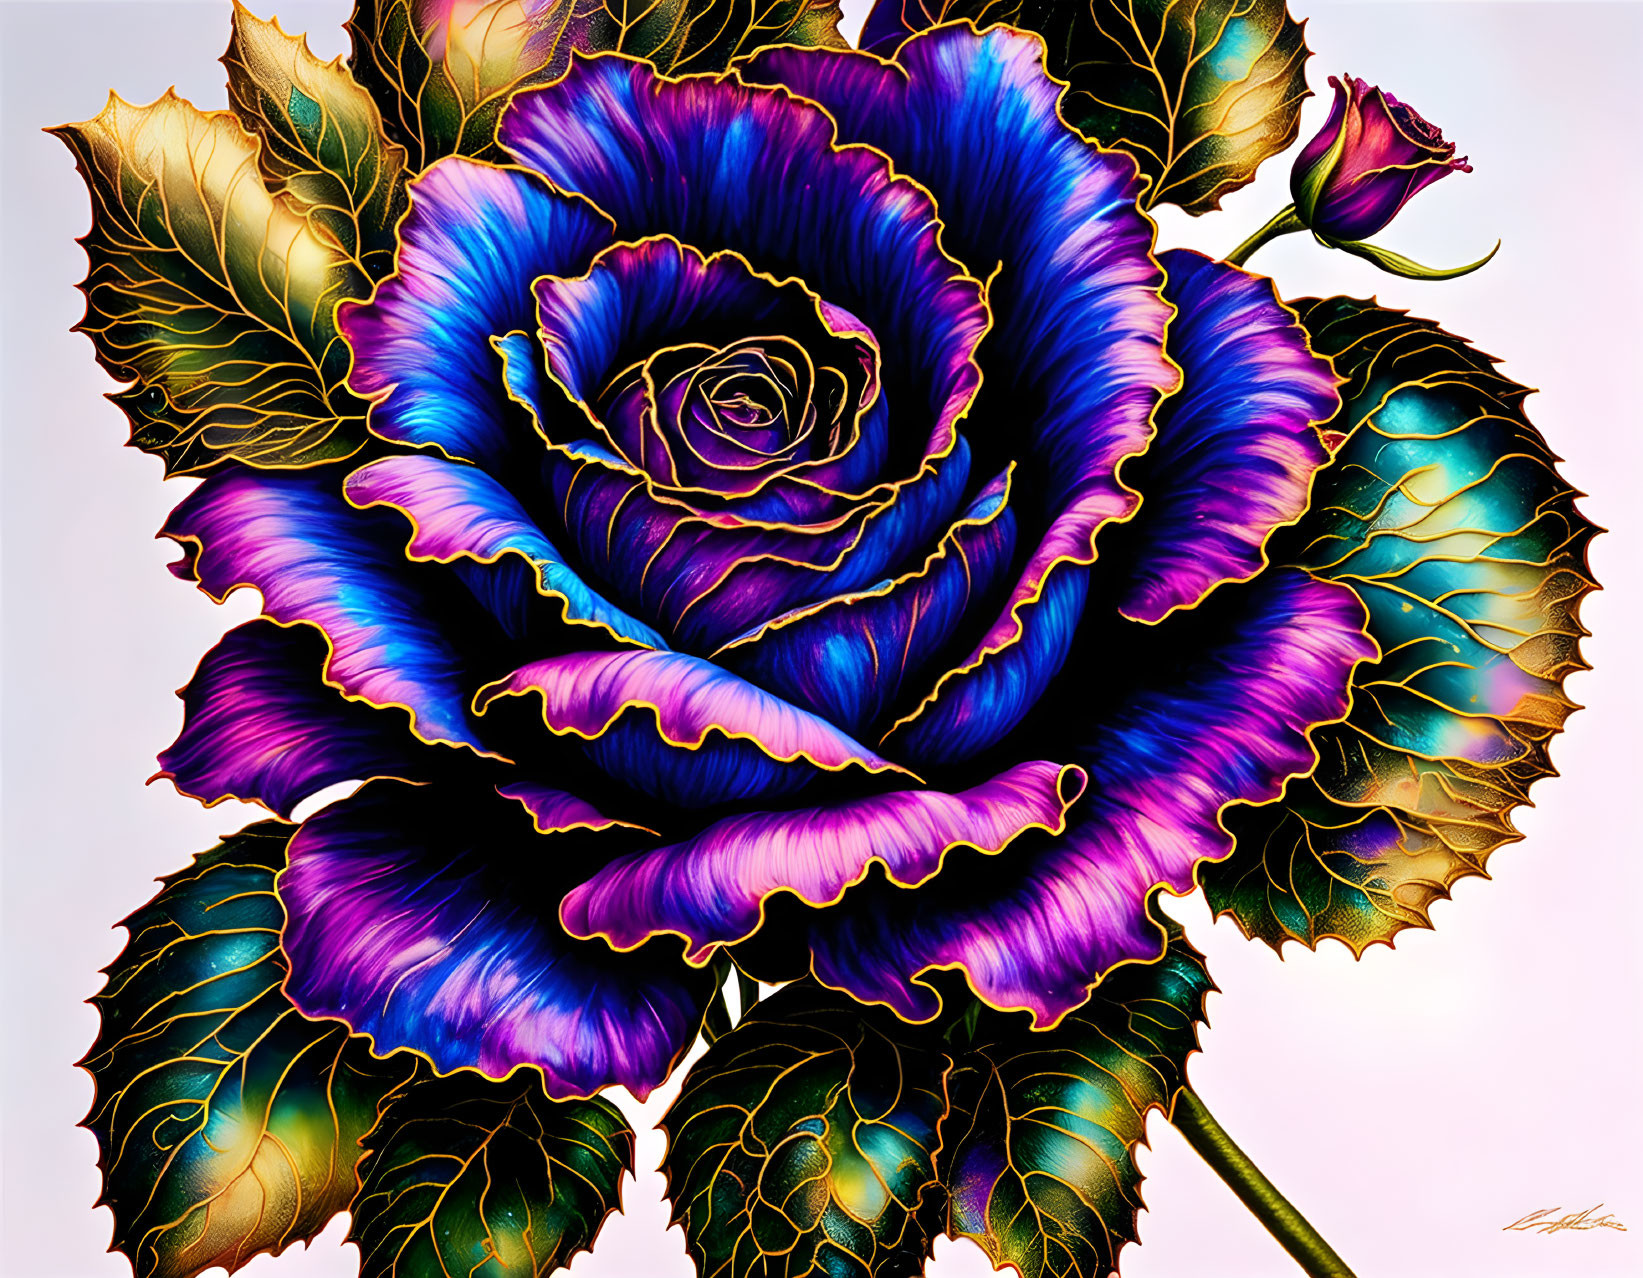 Colorful stylized rose with purple and blue petals on a soft background